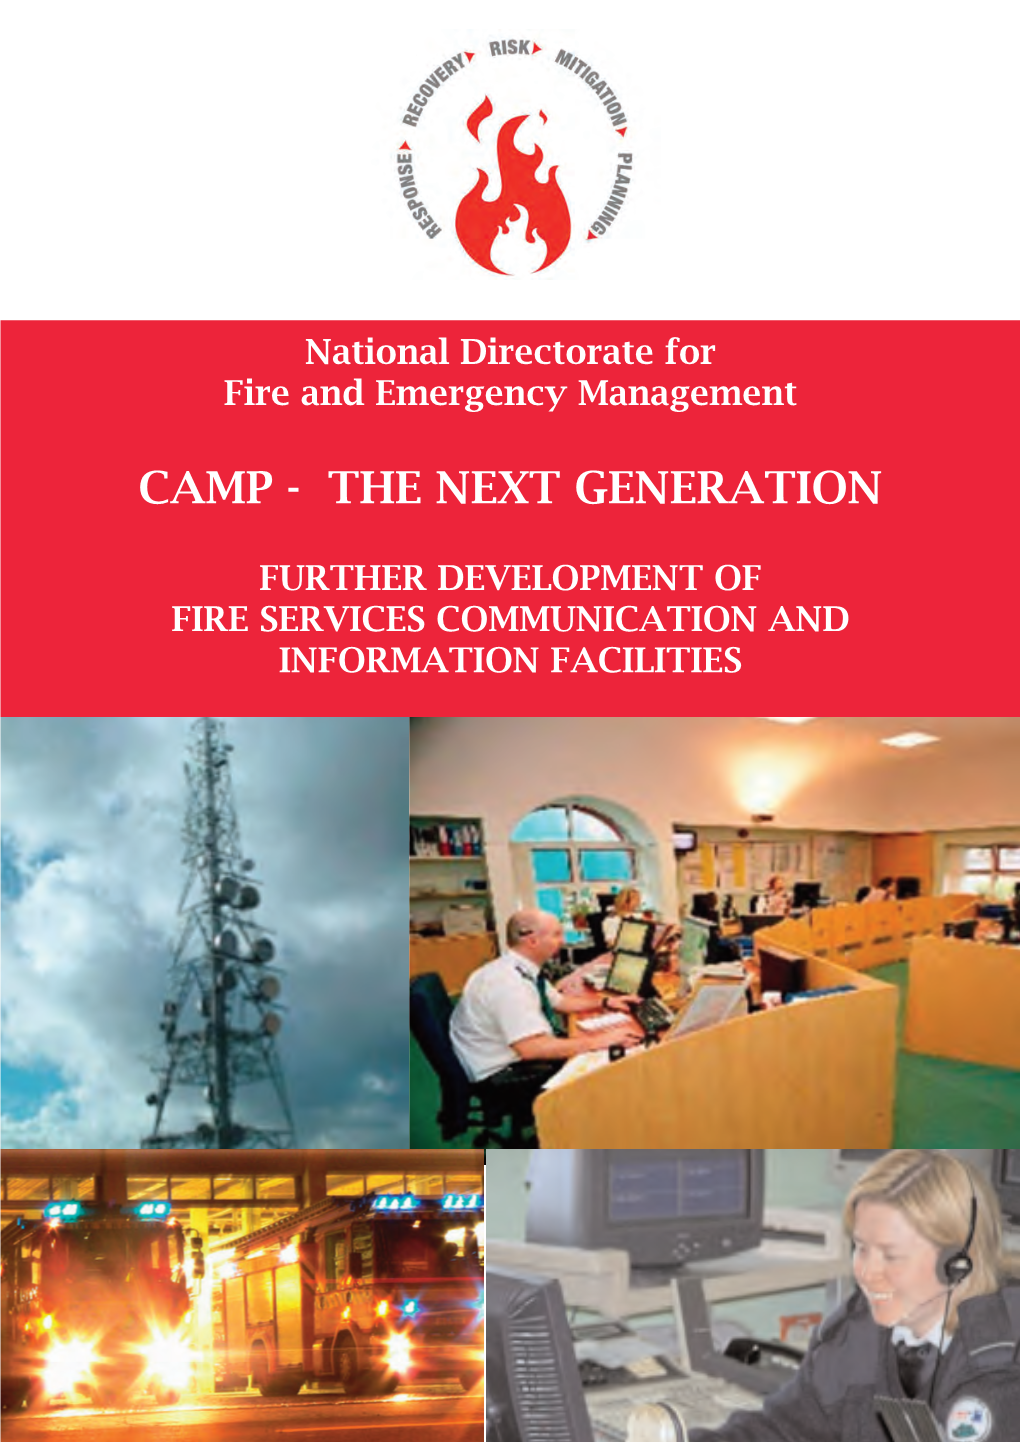 Camp - the Next Generation